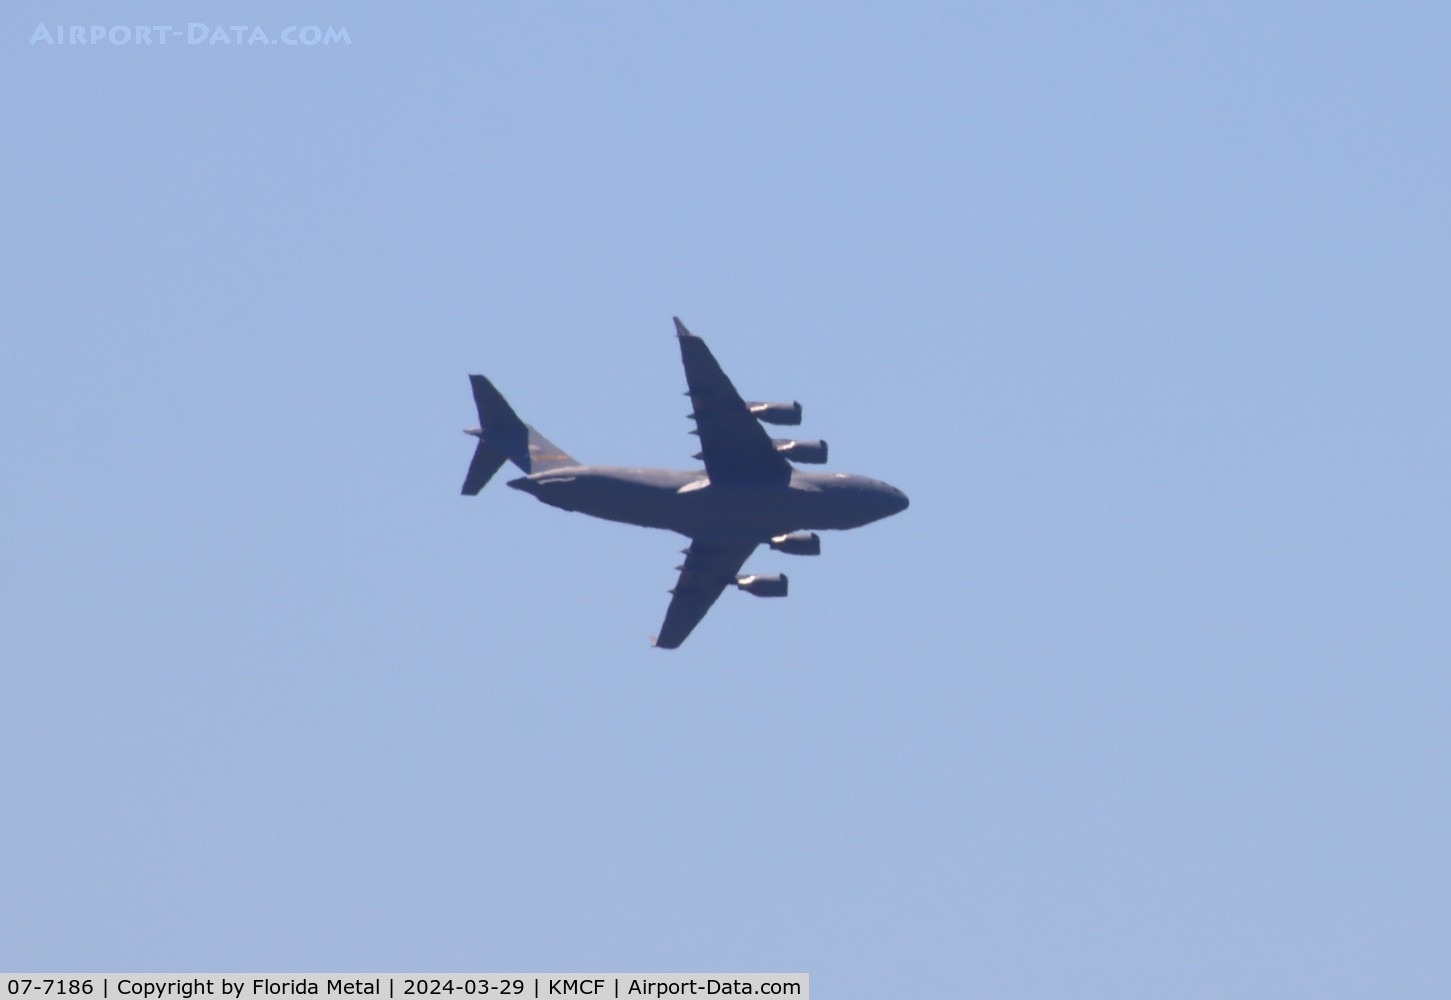 07-7186, 2007 Boeing C-17A Globemaster III C/N P-186, C-17 zx for MacDill Air Fest seen from TPA